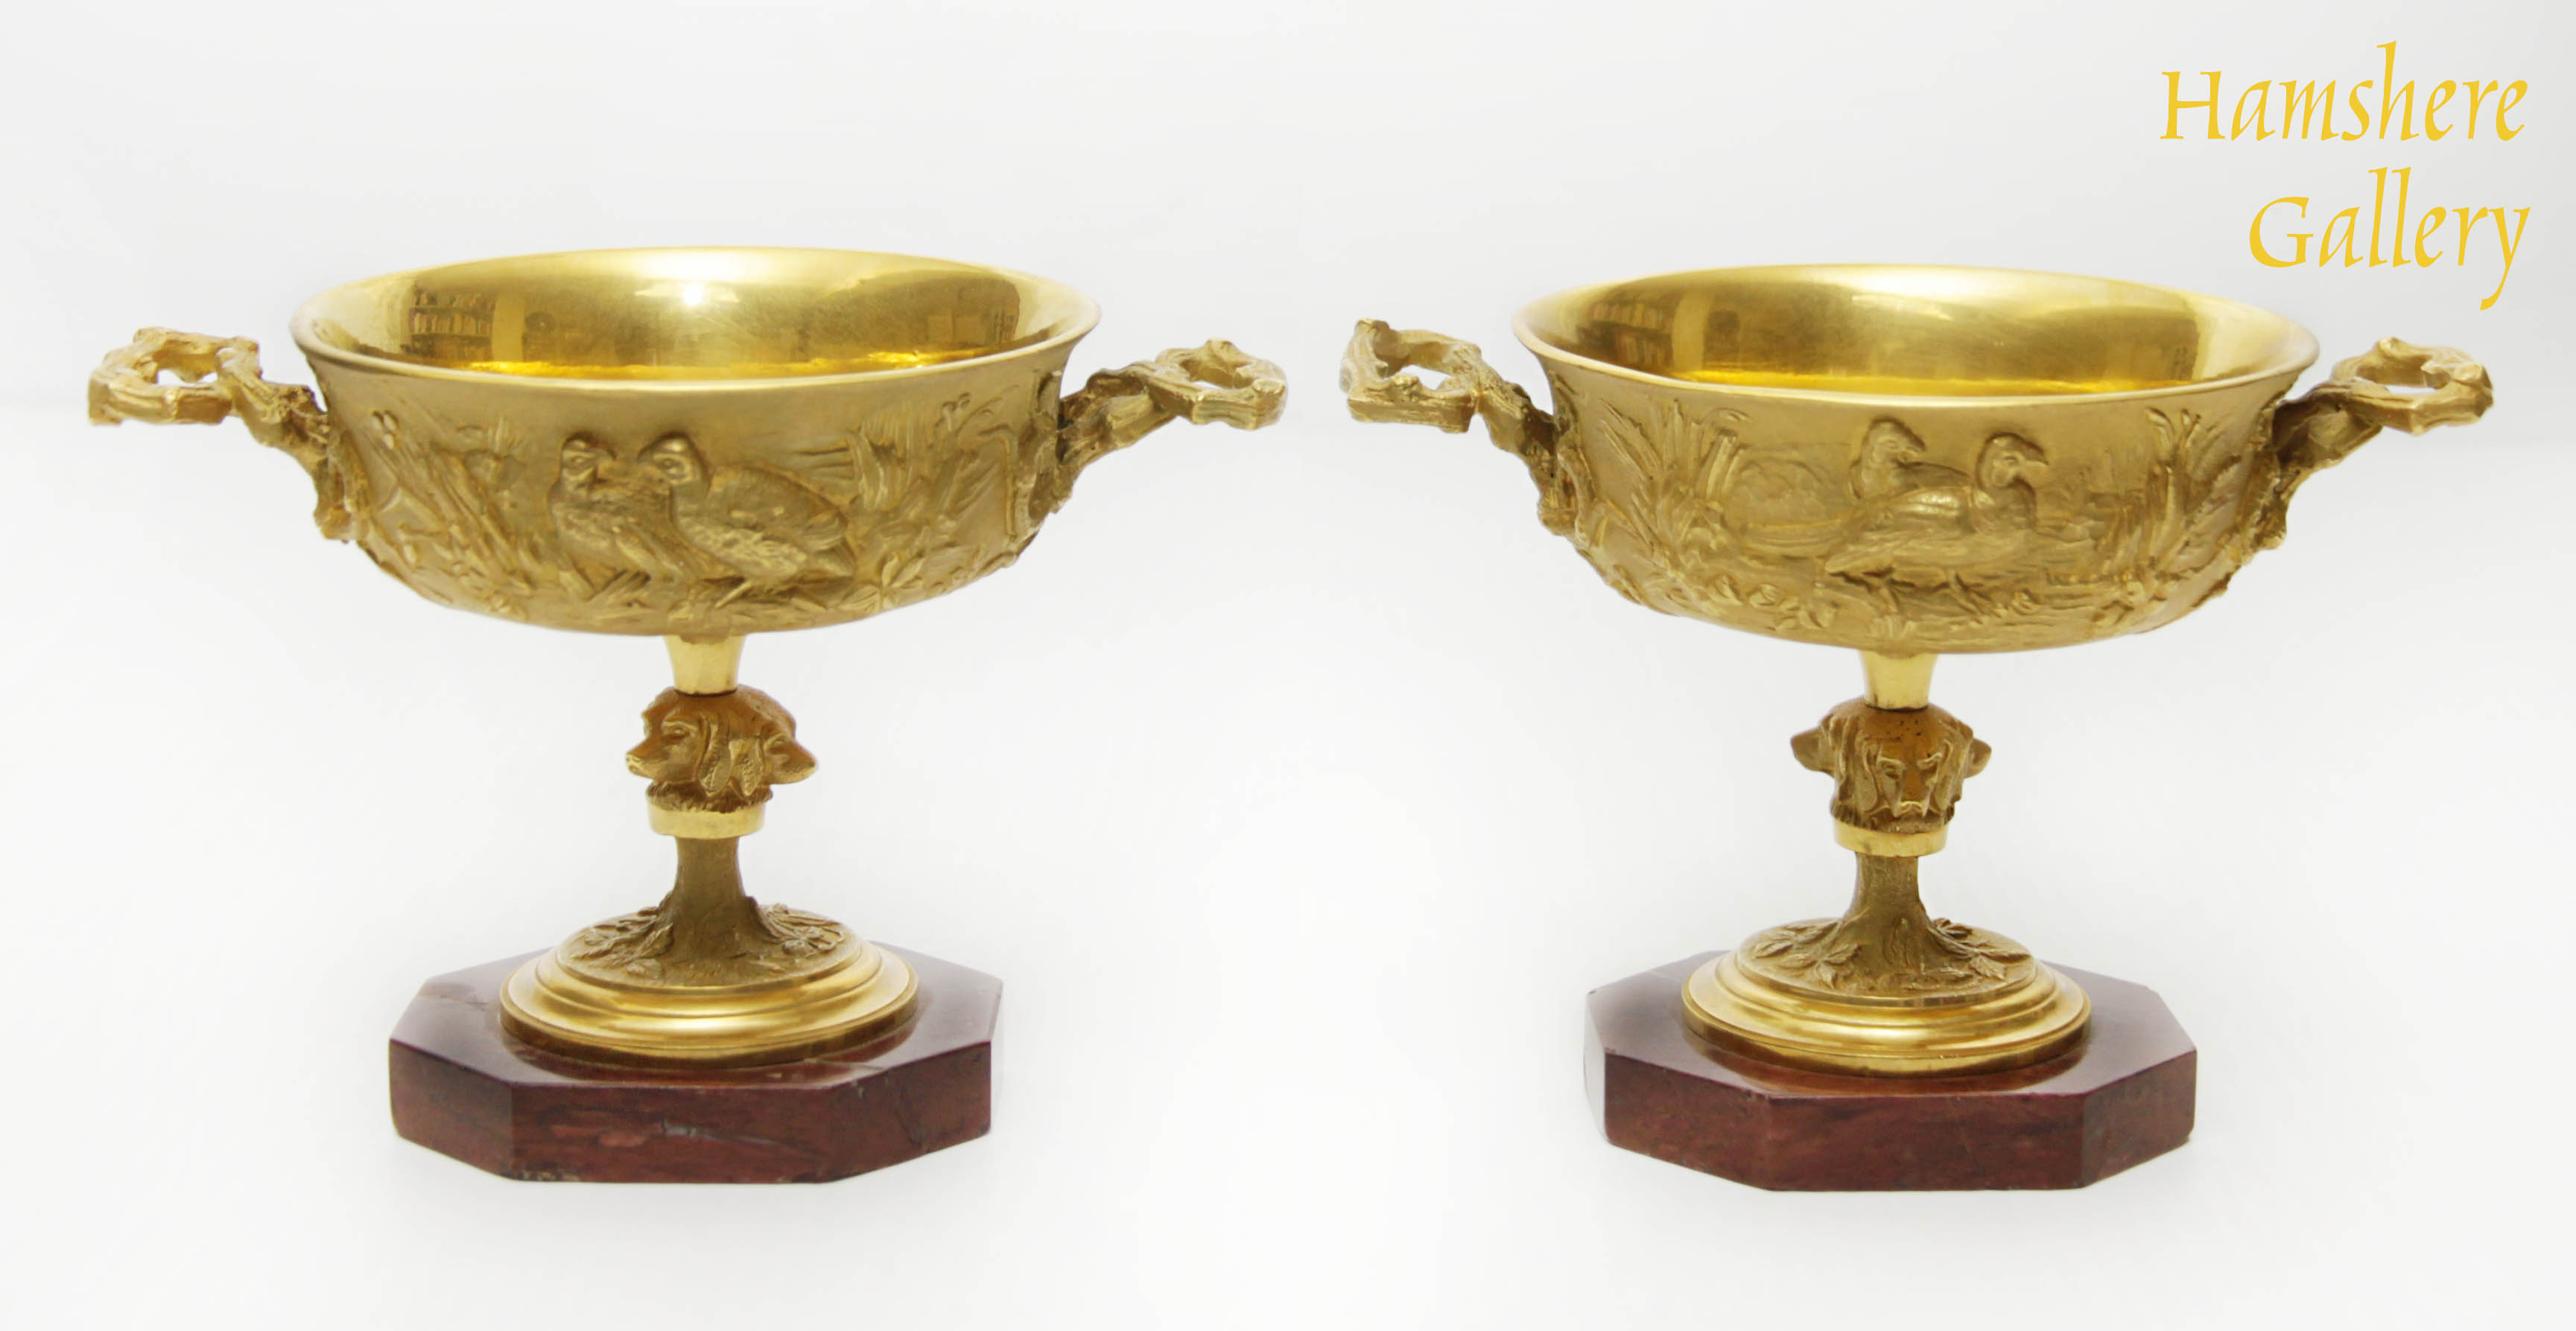 Click to see full size: A pair of bronze dore hunting / chasse, tazza / coupes of partridge, pheasants, Setter / hounds attributable to Christophe Fratin (French, 1800-1864)- A pair of bronze dore hunting / chasse, tazza / coupes of partridge, pheasants, Setter / hounds attributable to Christophe Fratin (French, 1800-1864)